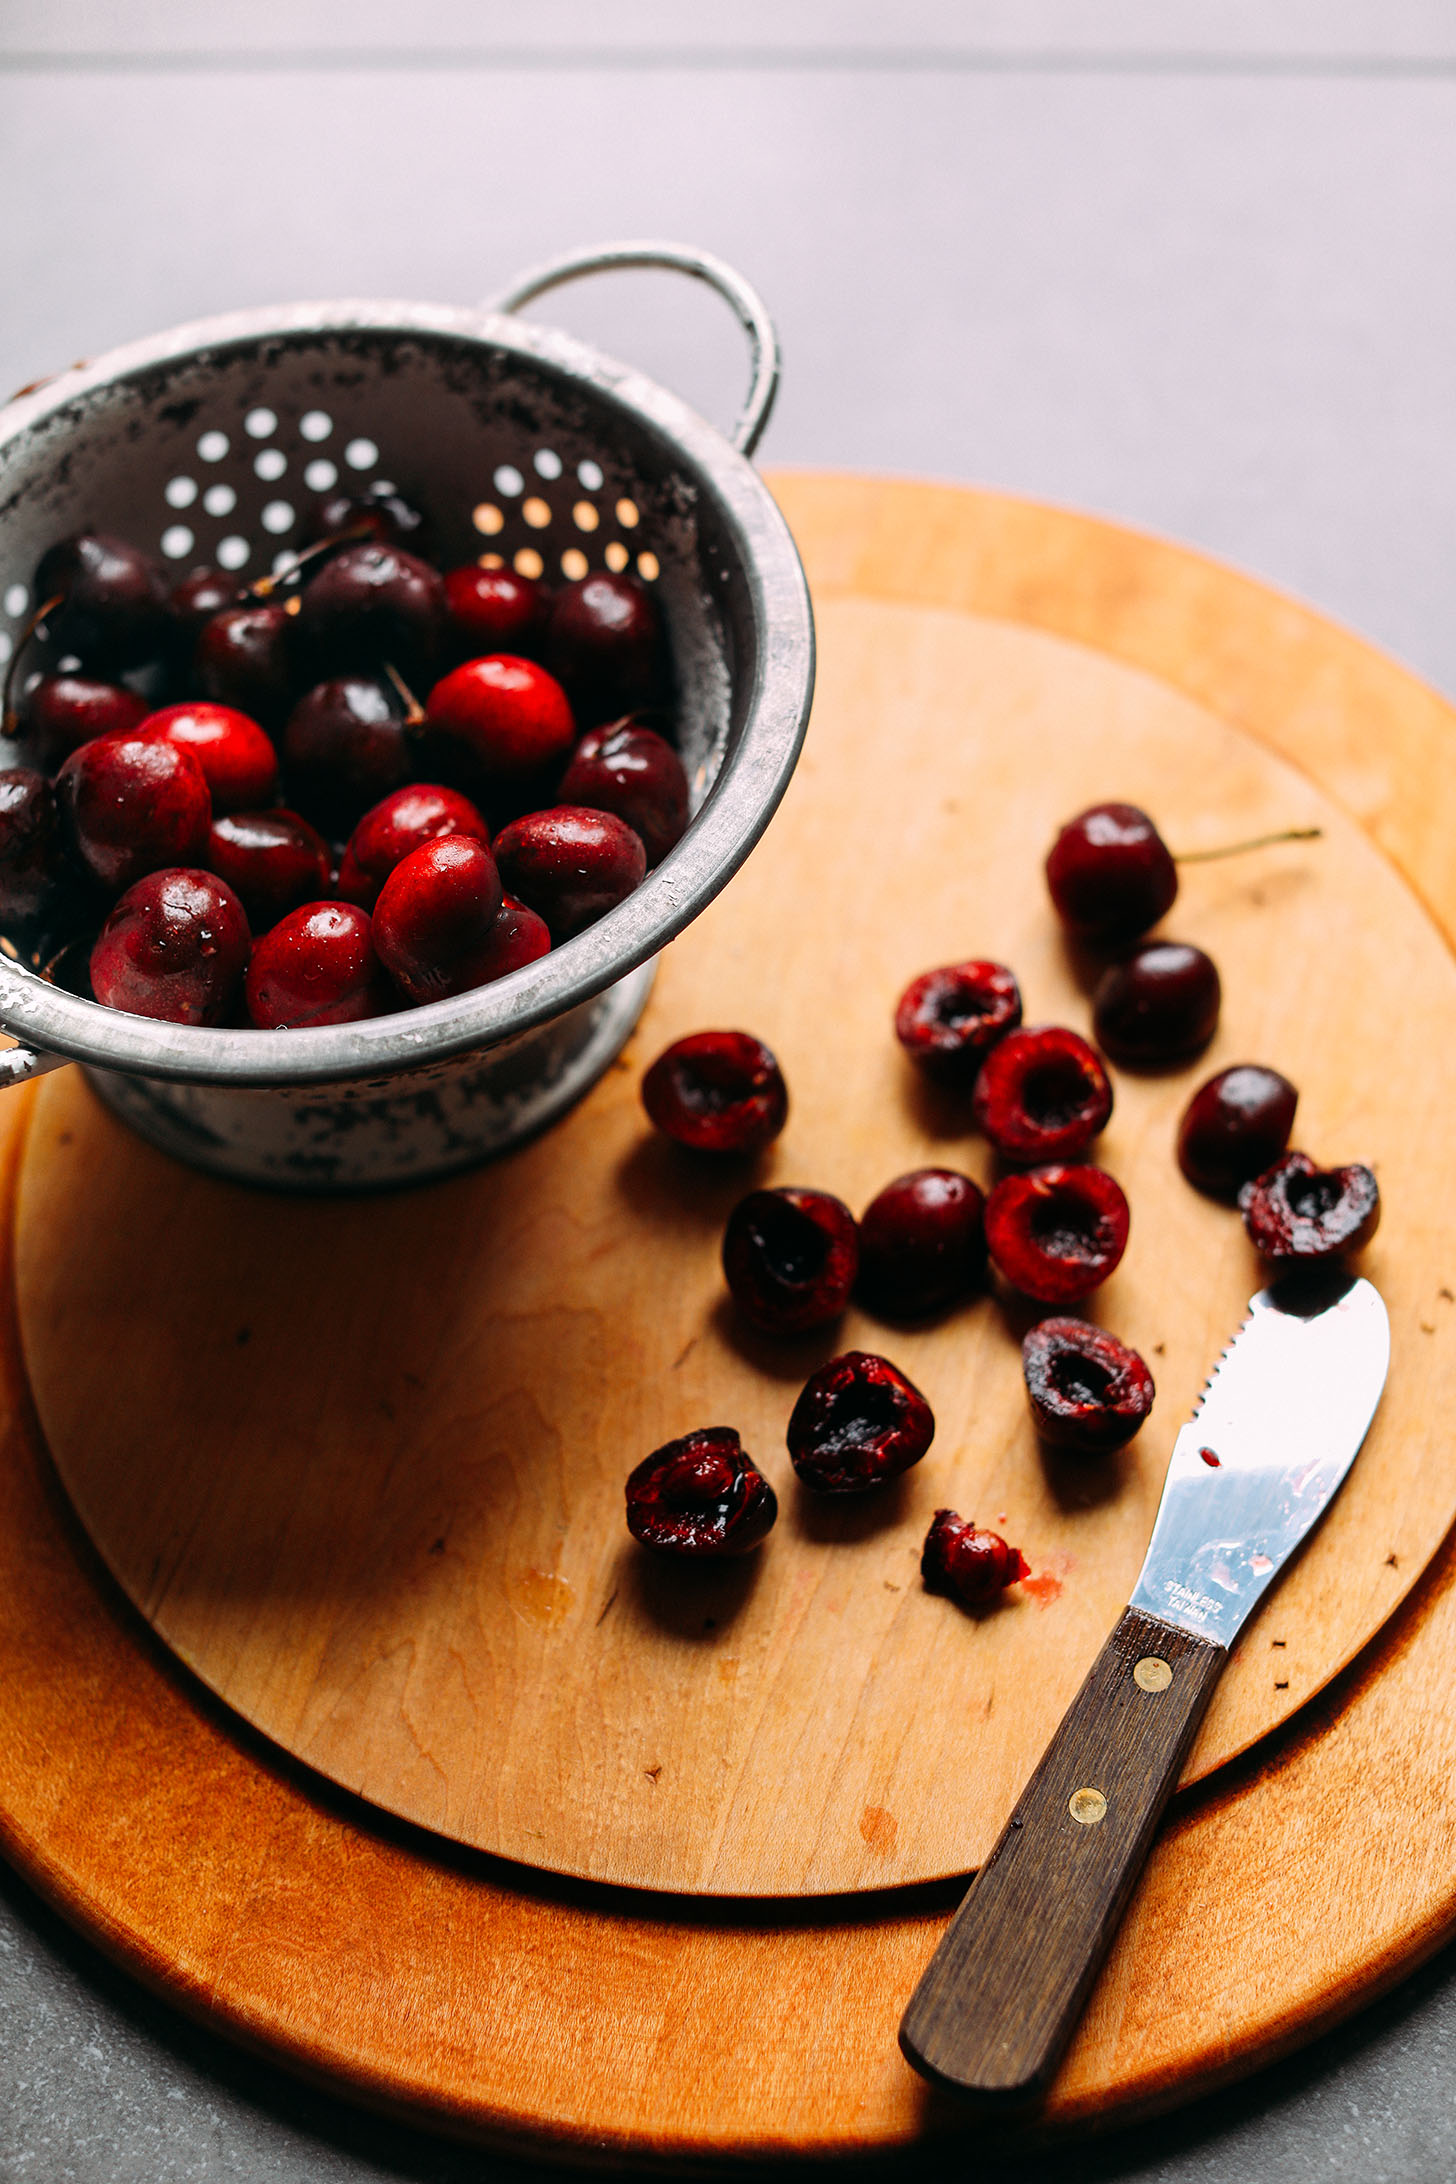 Colander with freshly washed cherries and some halved and pitted cherries on a wood cutting board